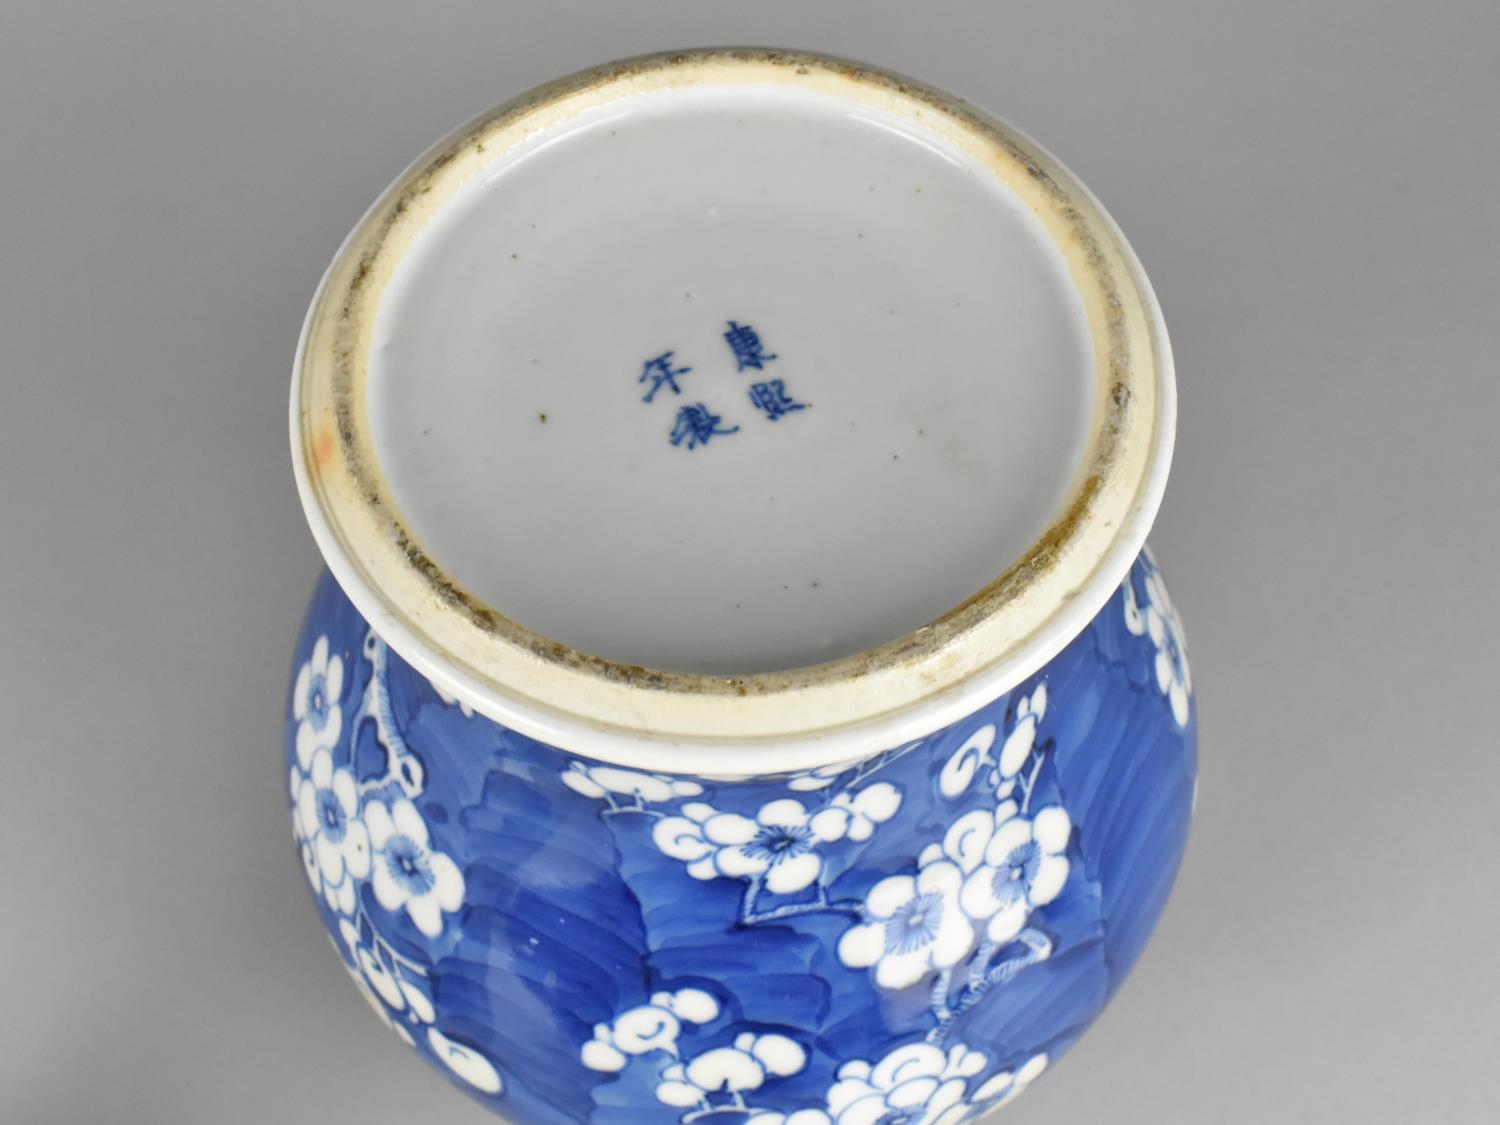 A Chinese Late Qing Dynasty Porcelain Blue and White Prunus Pattern Jar and Cover, Four Character - Image 4 of 4